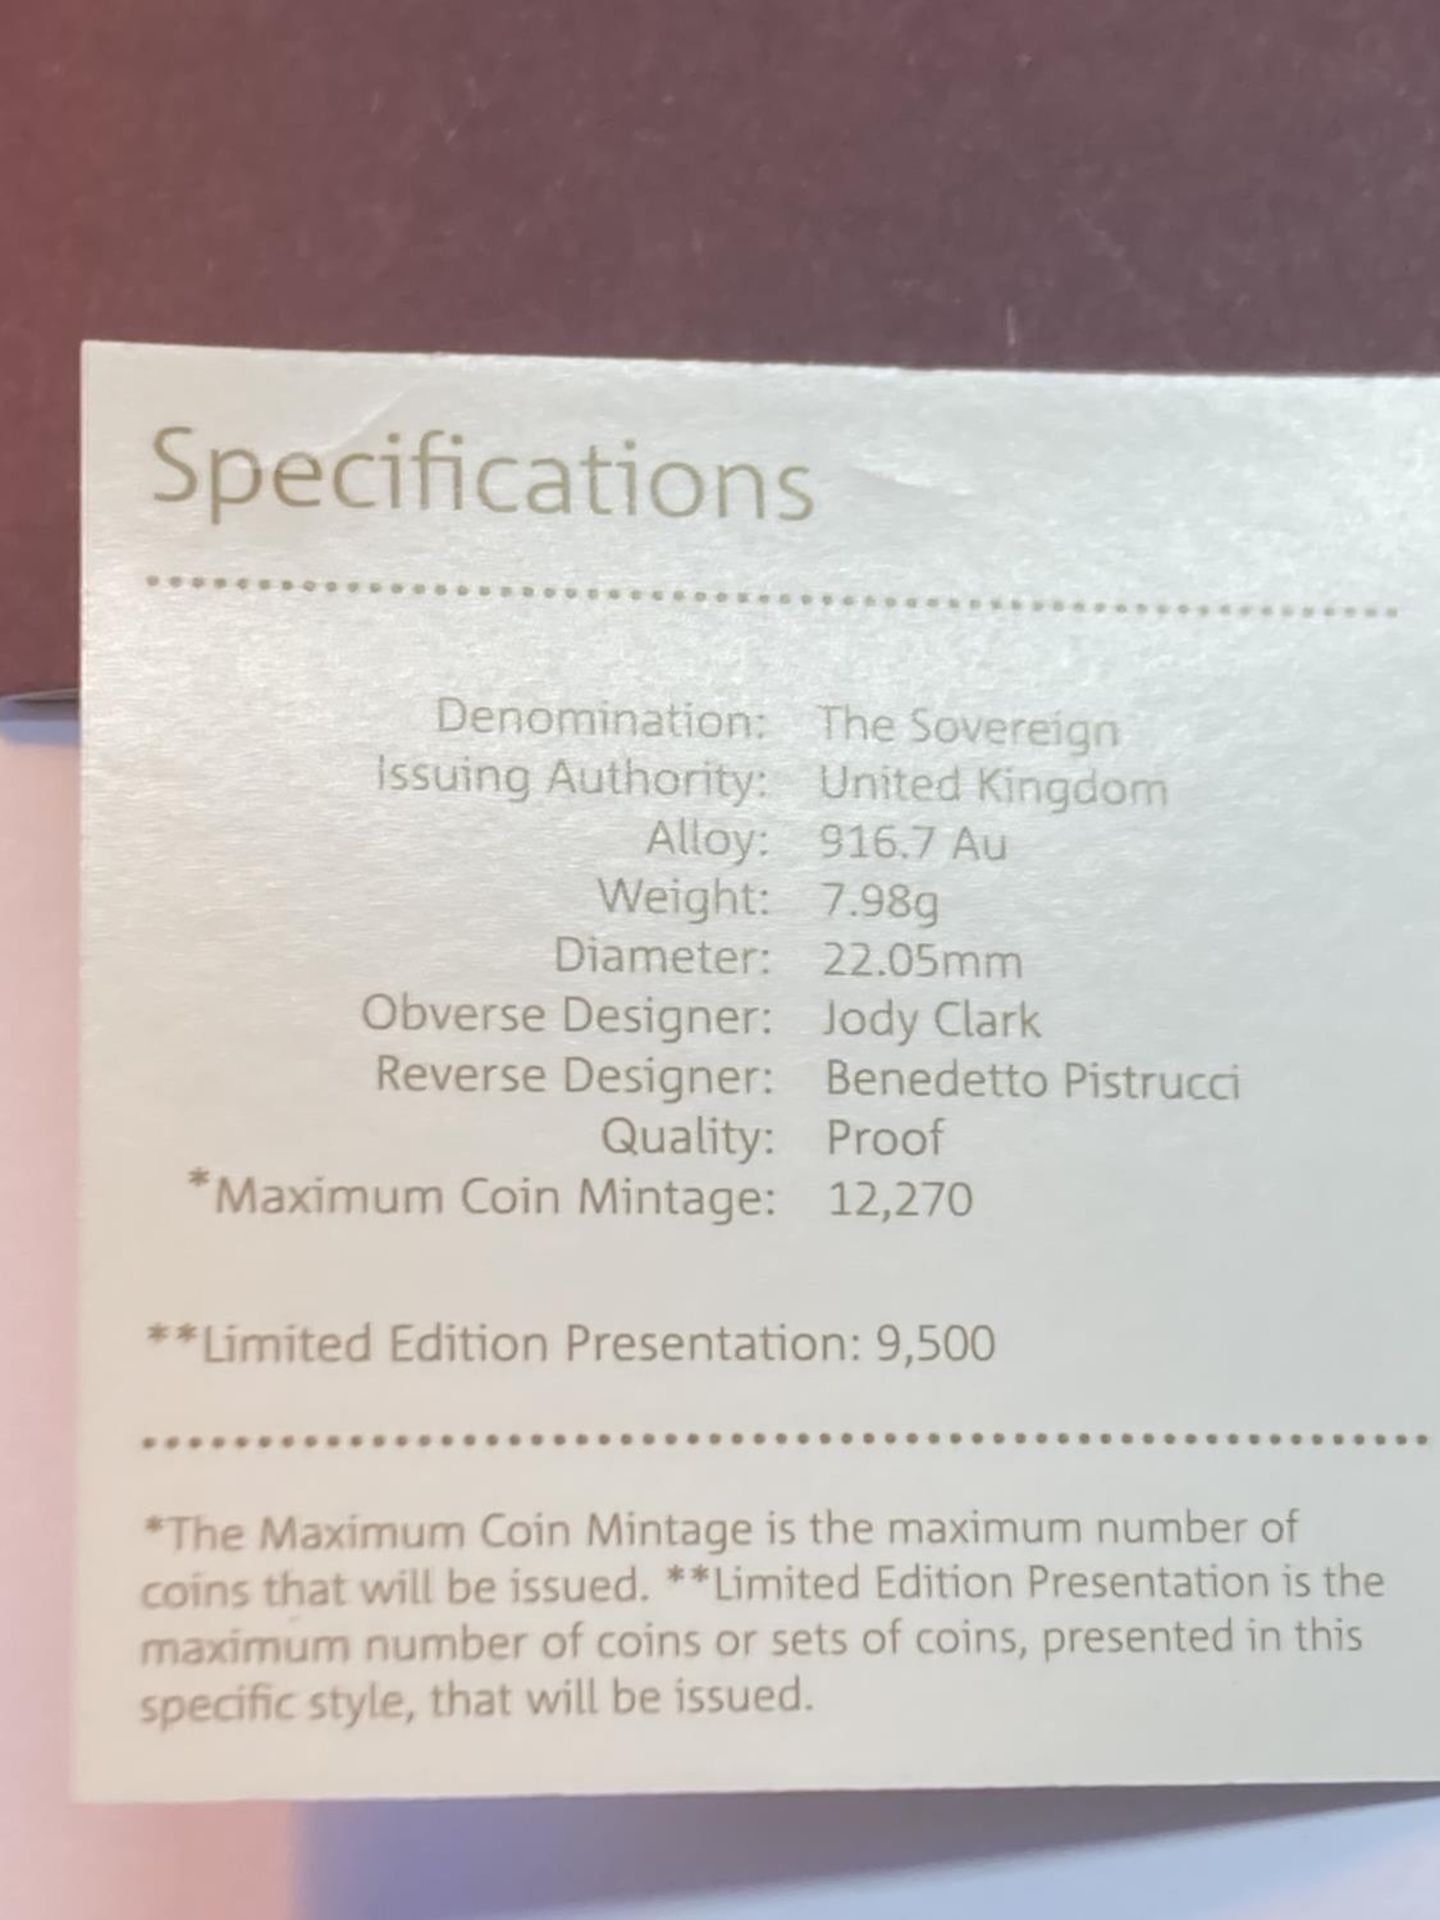 A 2019 THE SOVEREIGN GOLD PROOF LIMITED EDITION NUMBER 6,312 OF 9,500 IN A WOODEN BOXED CASE - Image 5 of 5